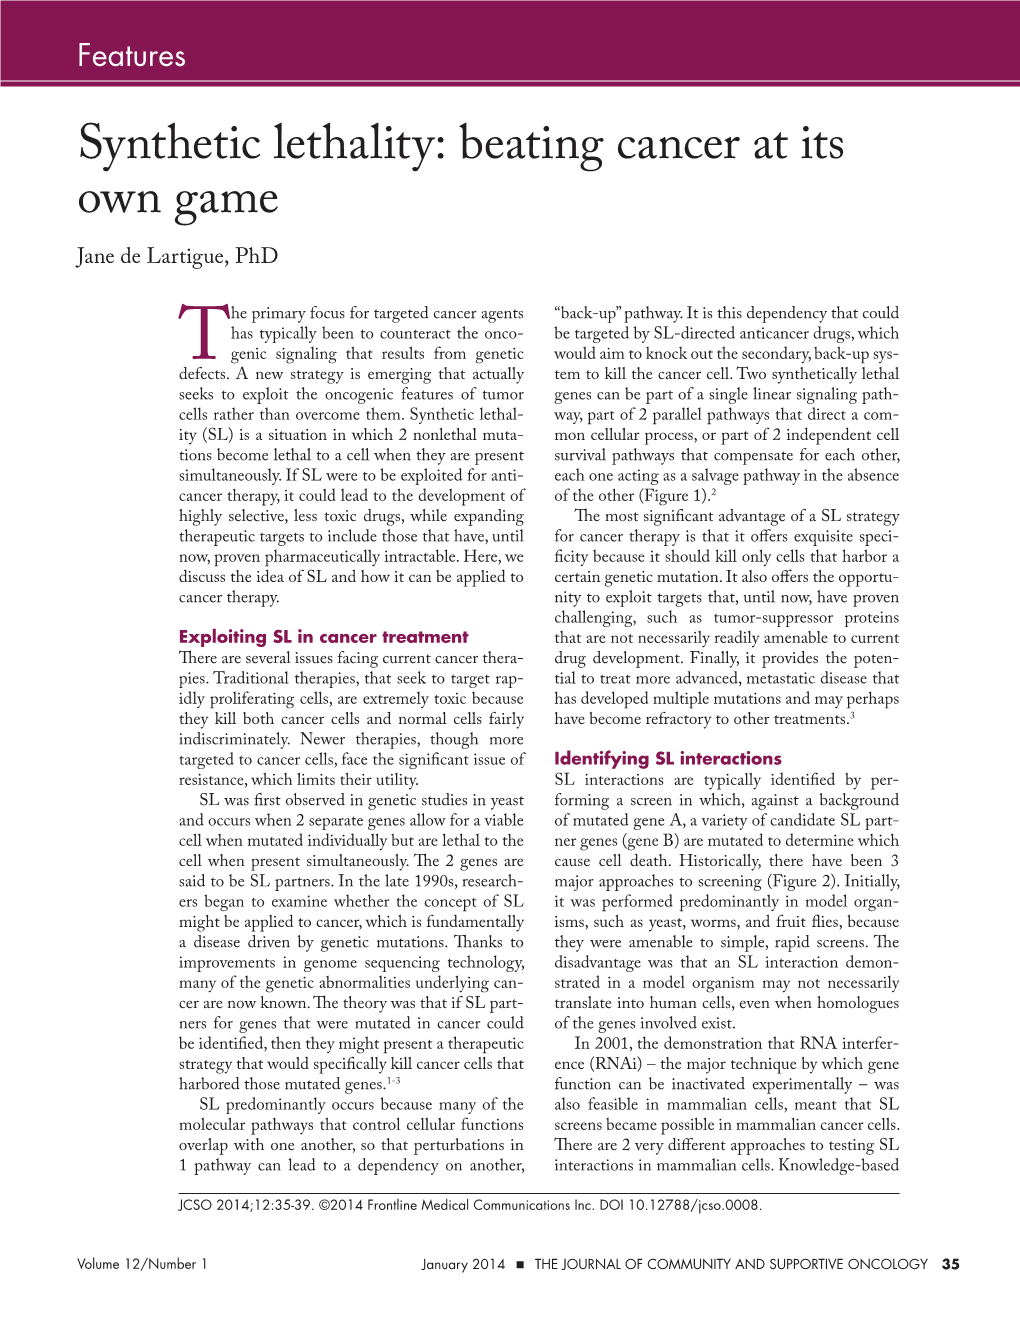 Synthetic Lethality: Beating Cancer at Its Own Game Jane De Lartigue, Phd